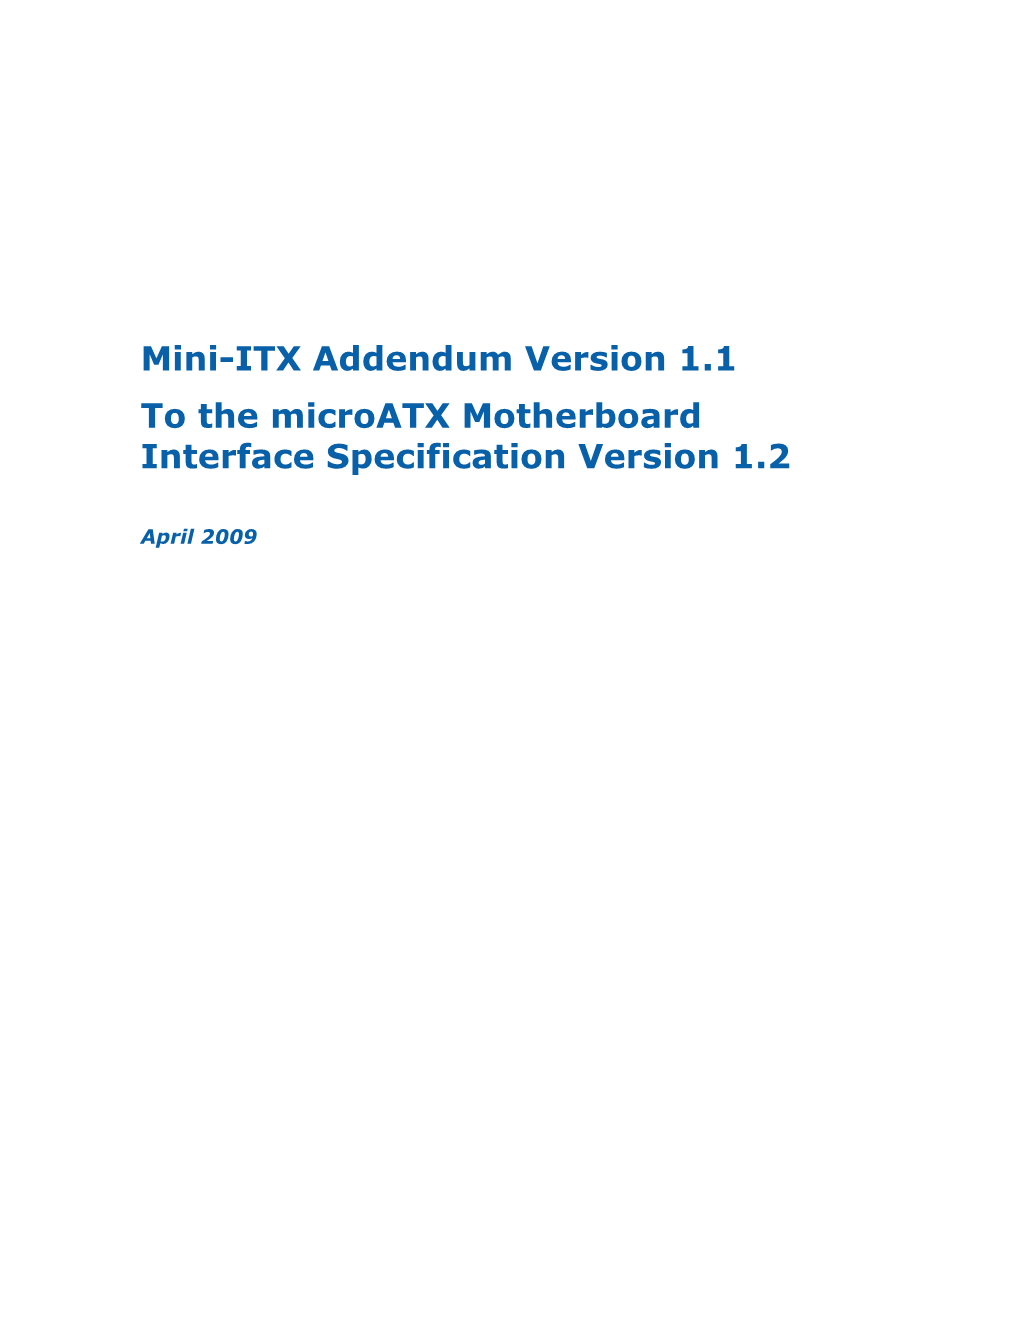 Mini-ITX Addendum Version 1.1 to the Microatx Motherboard Interface Specification Version 1.2